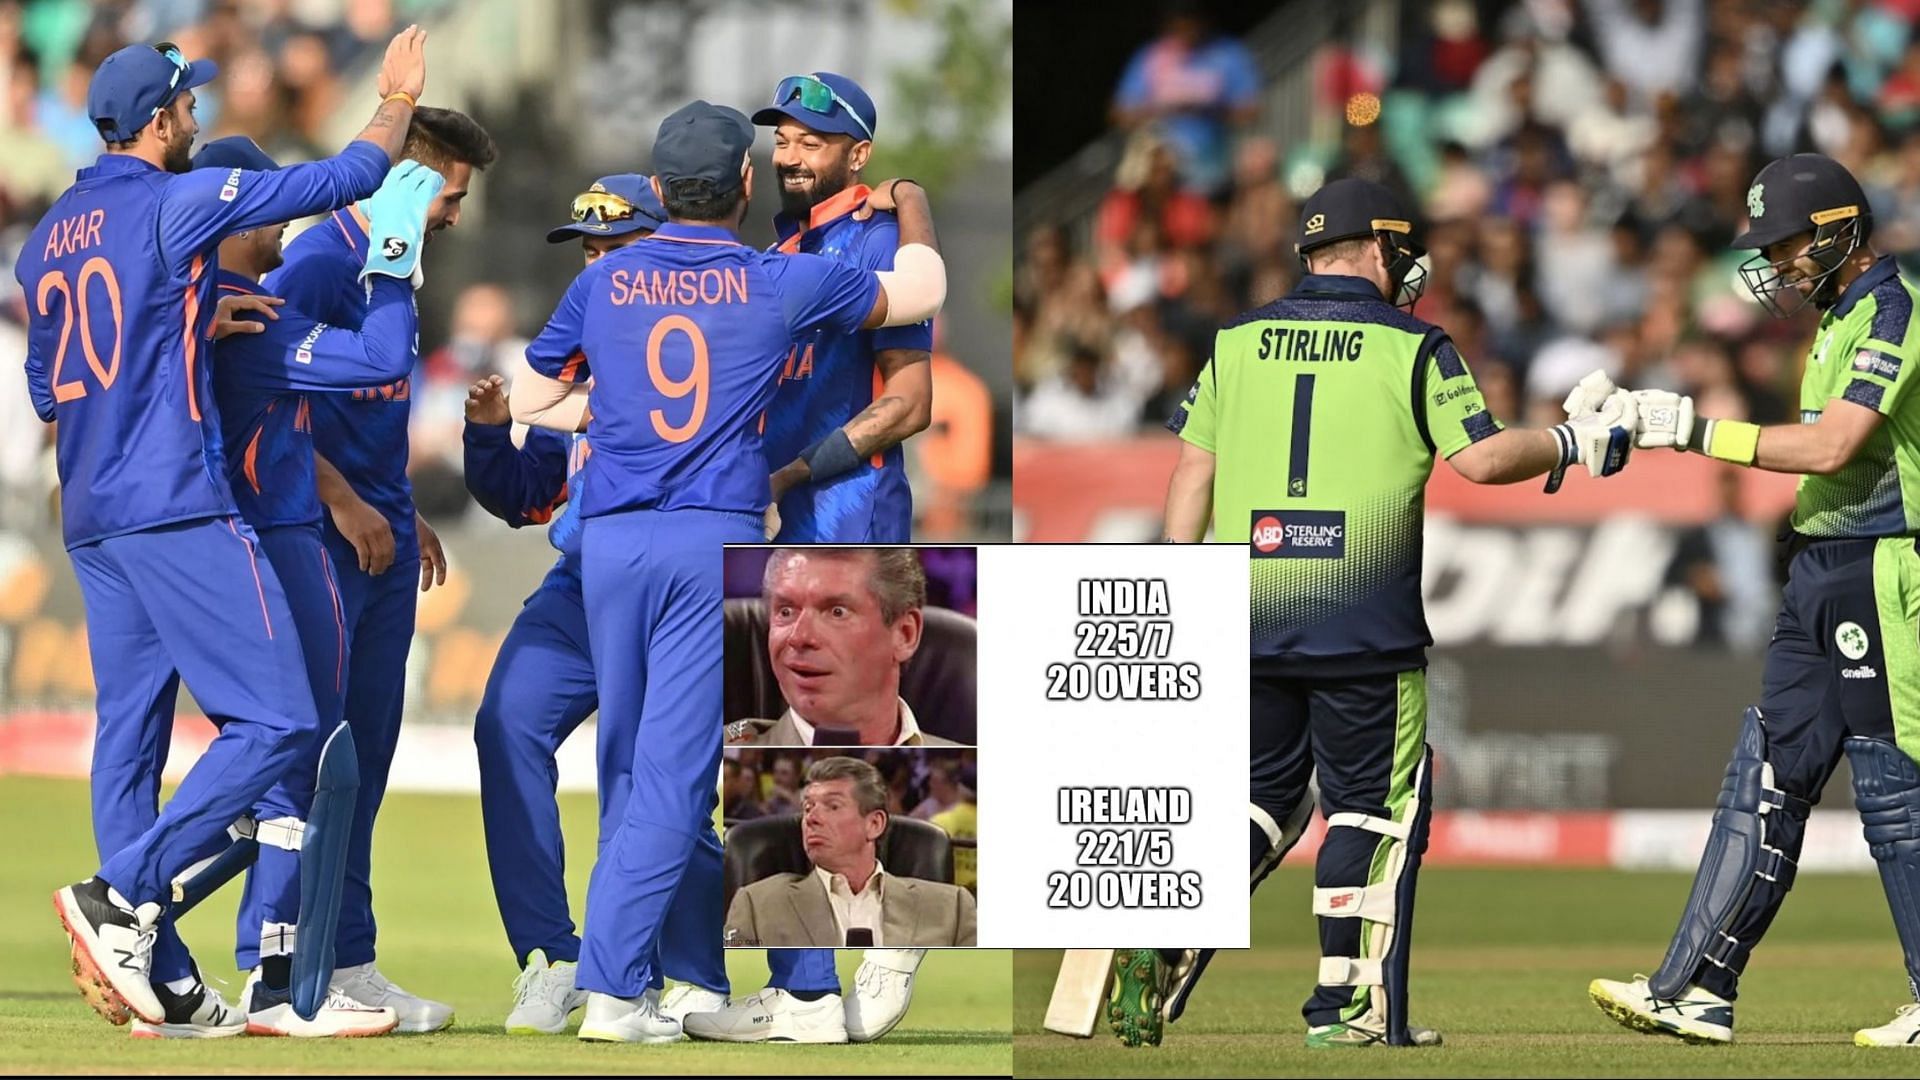 India defeated Ireland by four runs in the second T20I of the series (Image: Instagram)